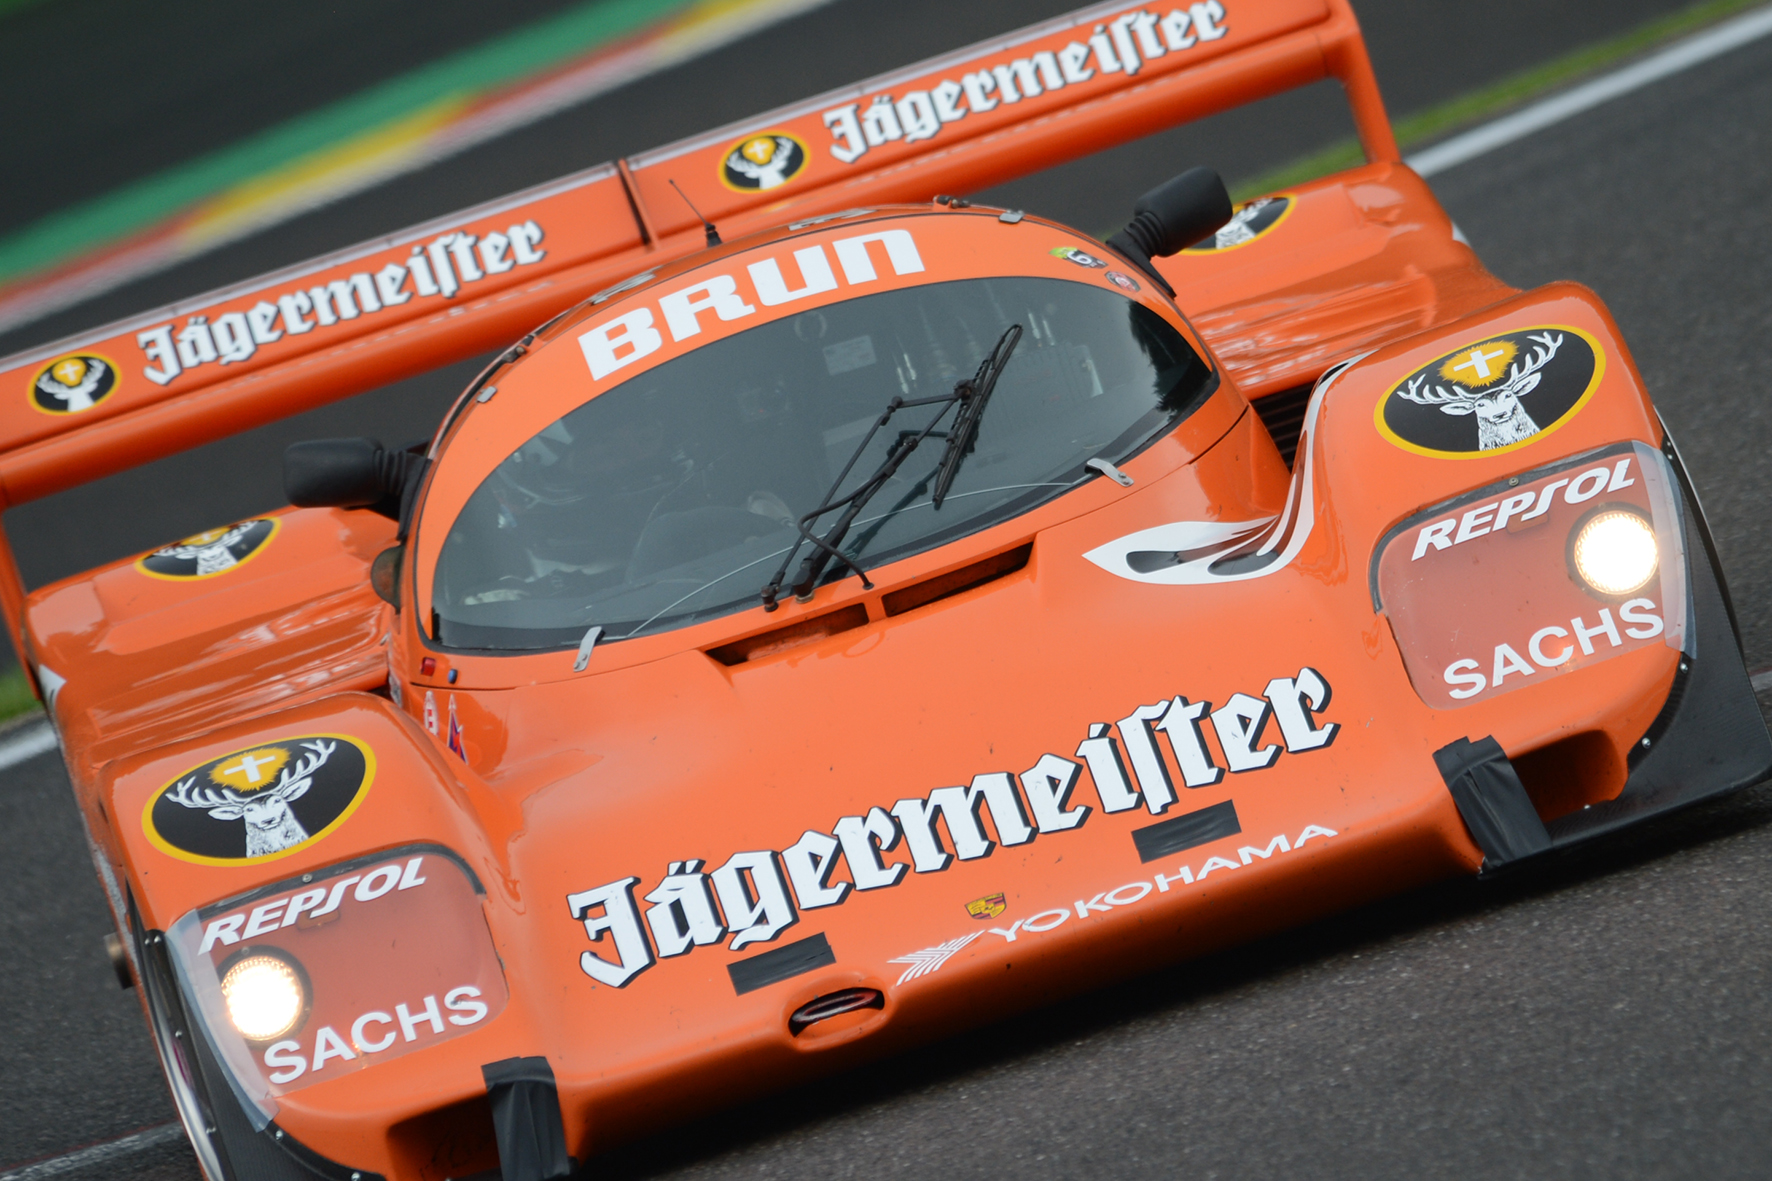 Porsche 956 / 962 - The Car That Sets New Standards To Group C Racing